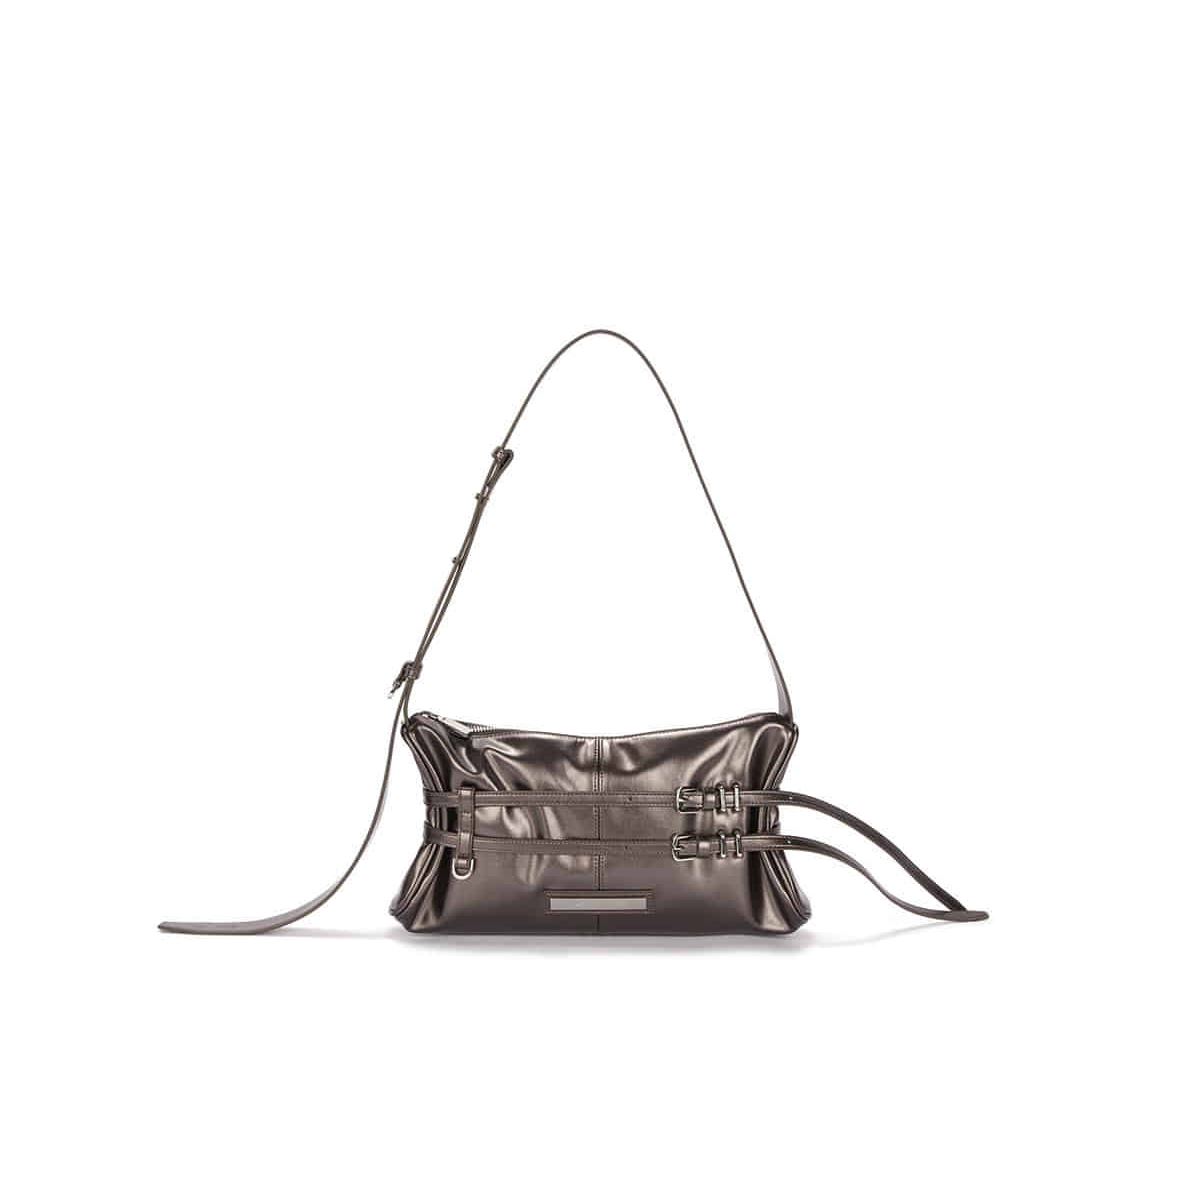 DOUBLE BELTED STRAP MINI BAG